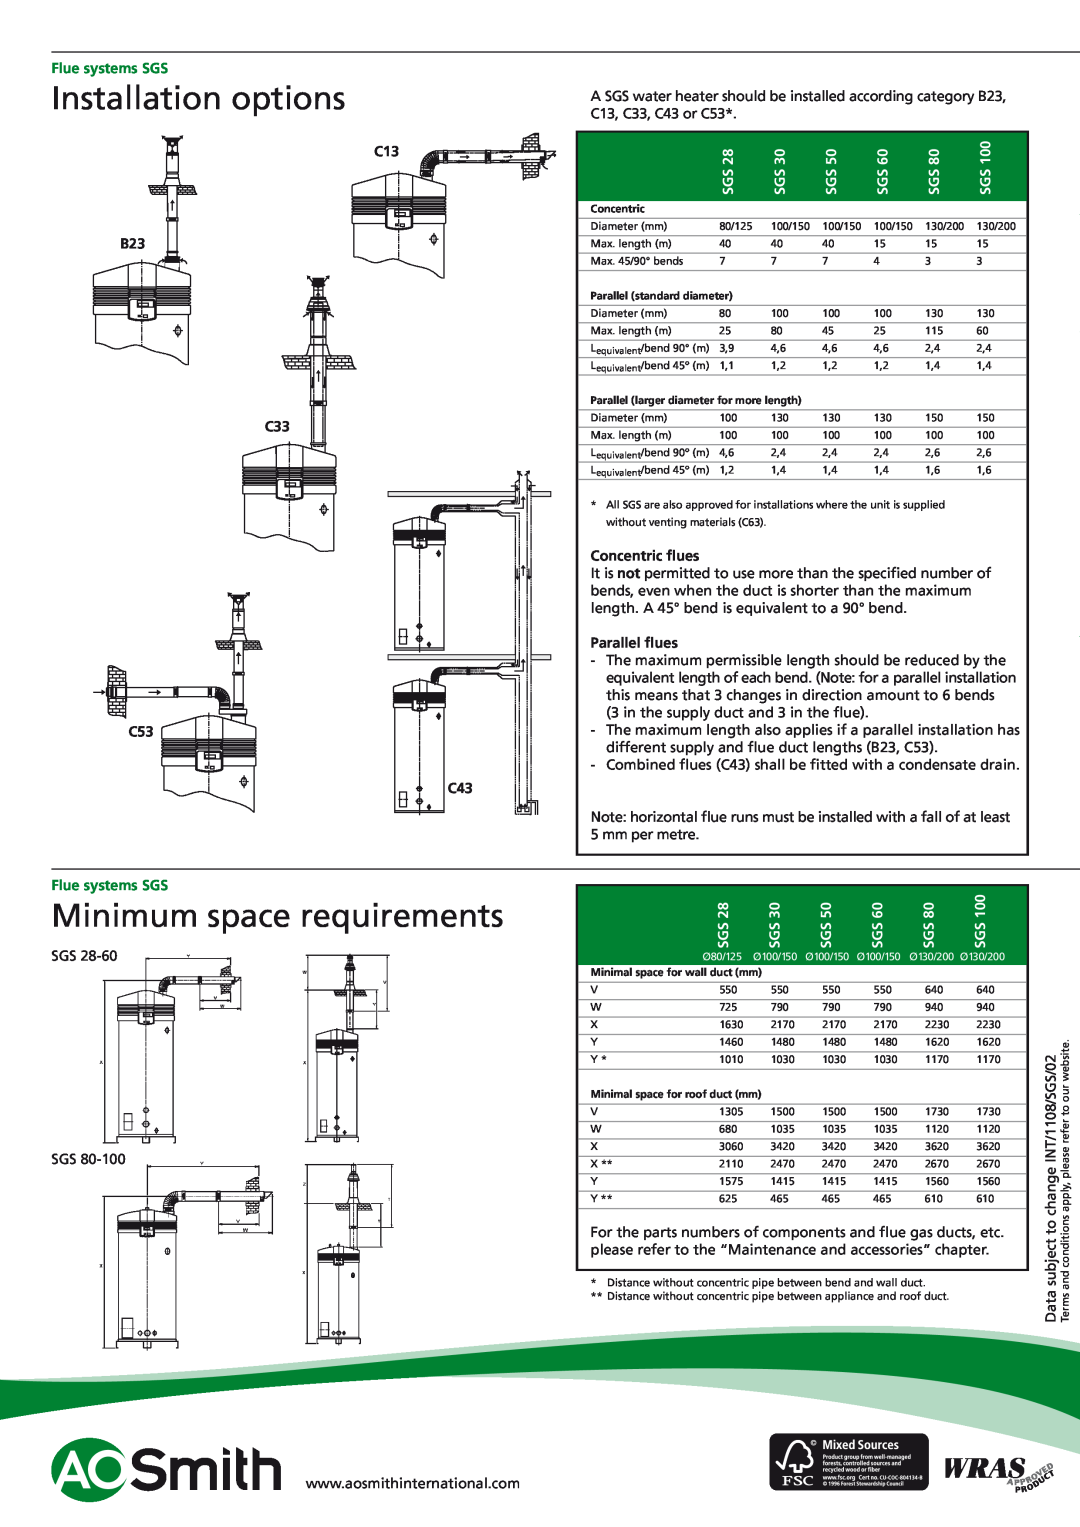 A.O. Smith SGS - 60, SGS - 50 manual Installation options, Minimum space requirements, Flue systems SGS, C13 B23 C33 C53 C43 